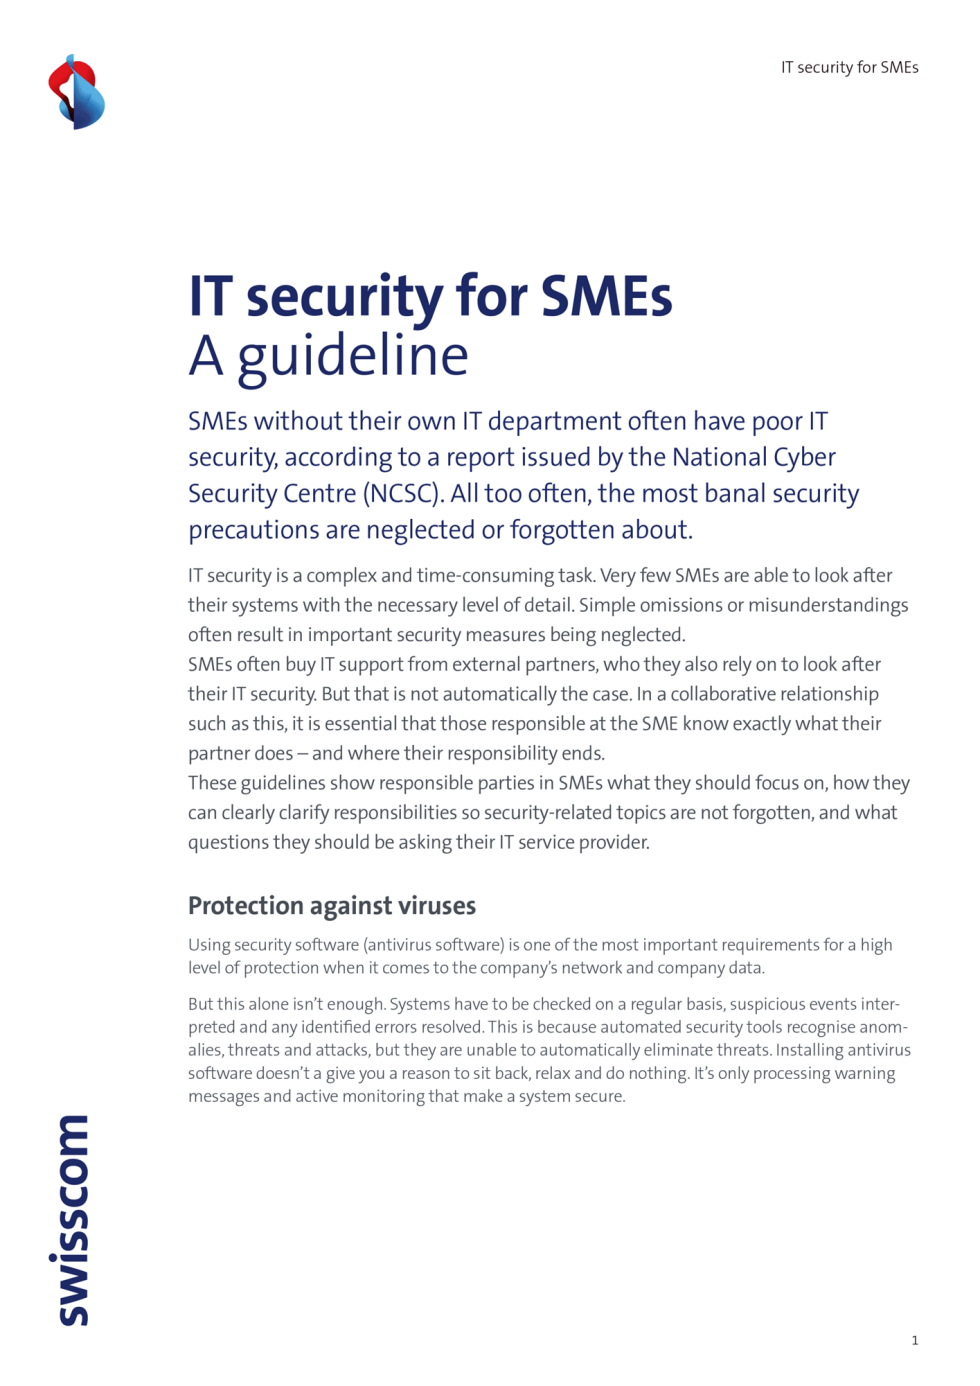 IT Security for SMEs